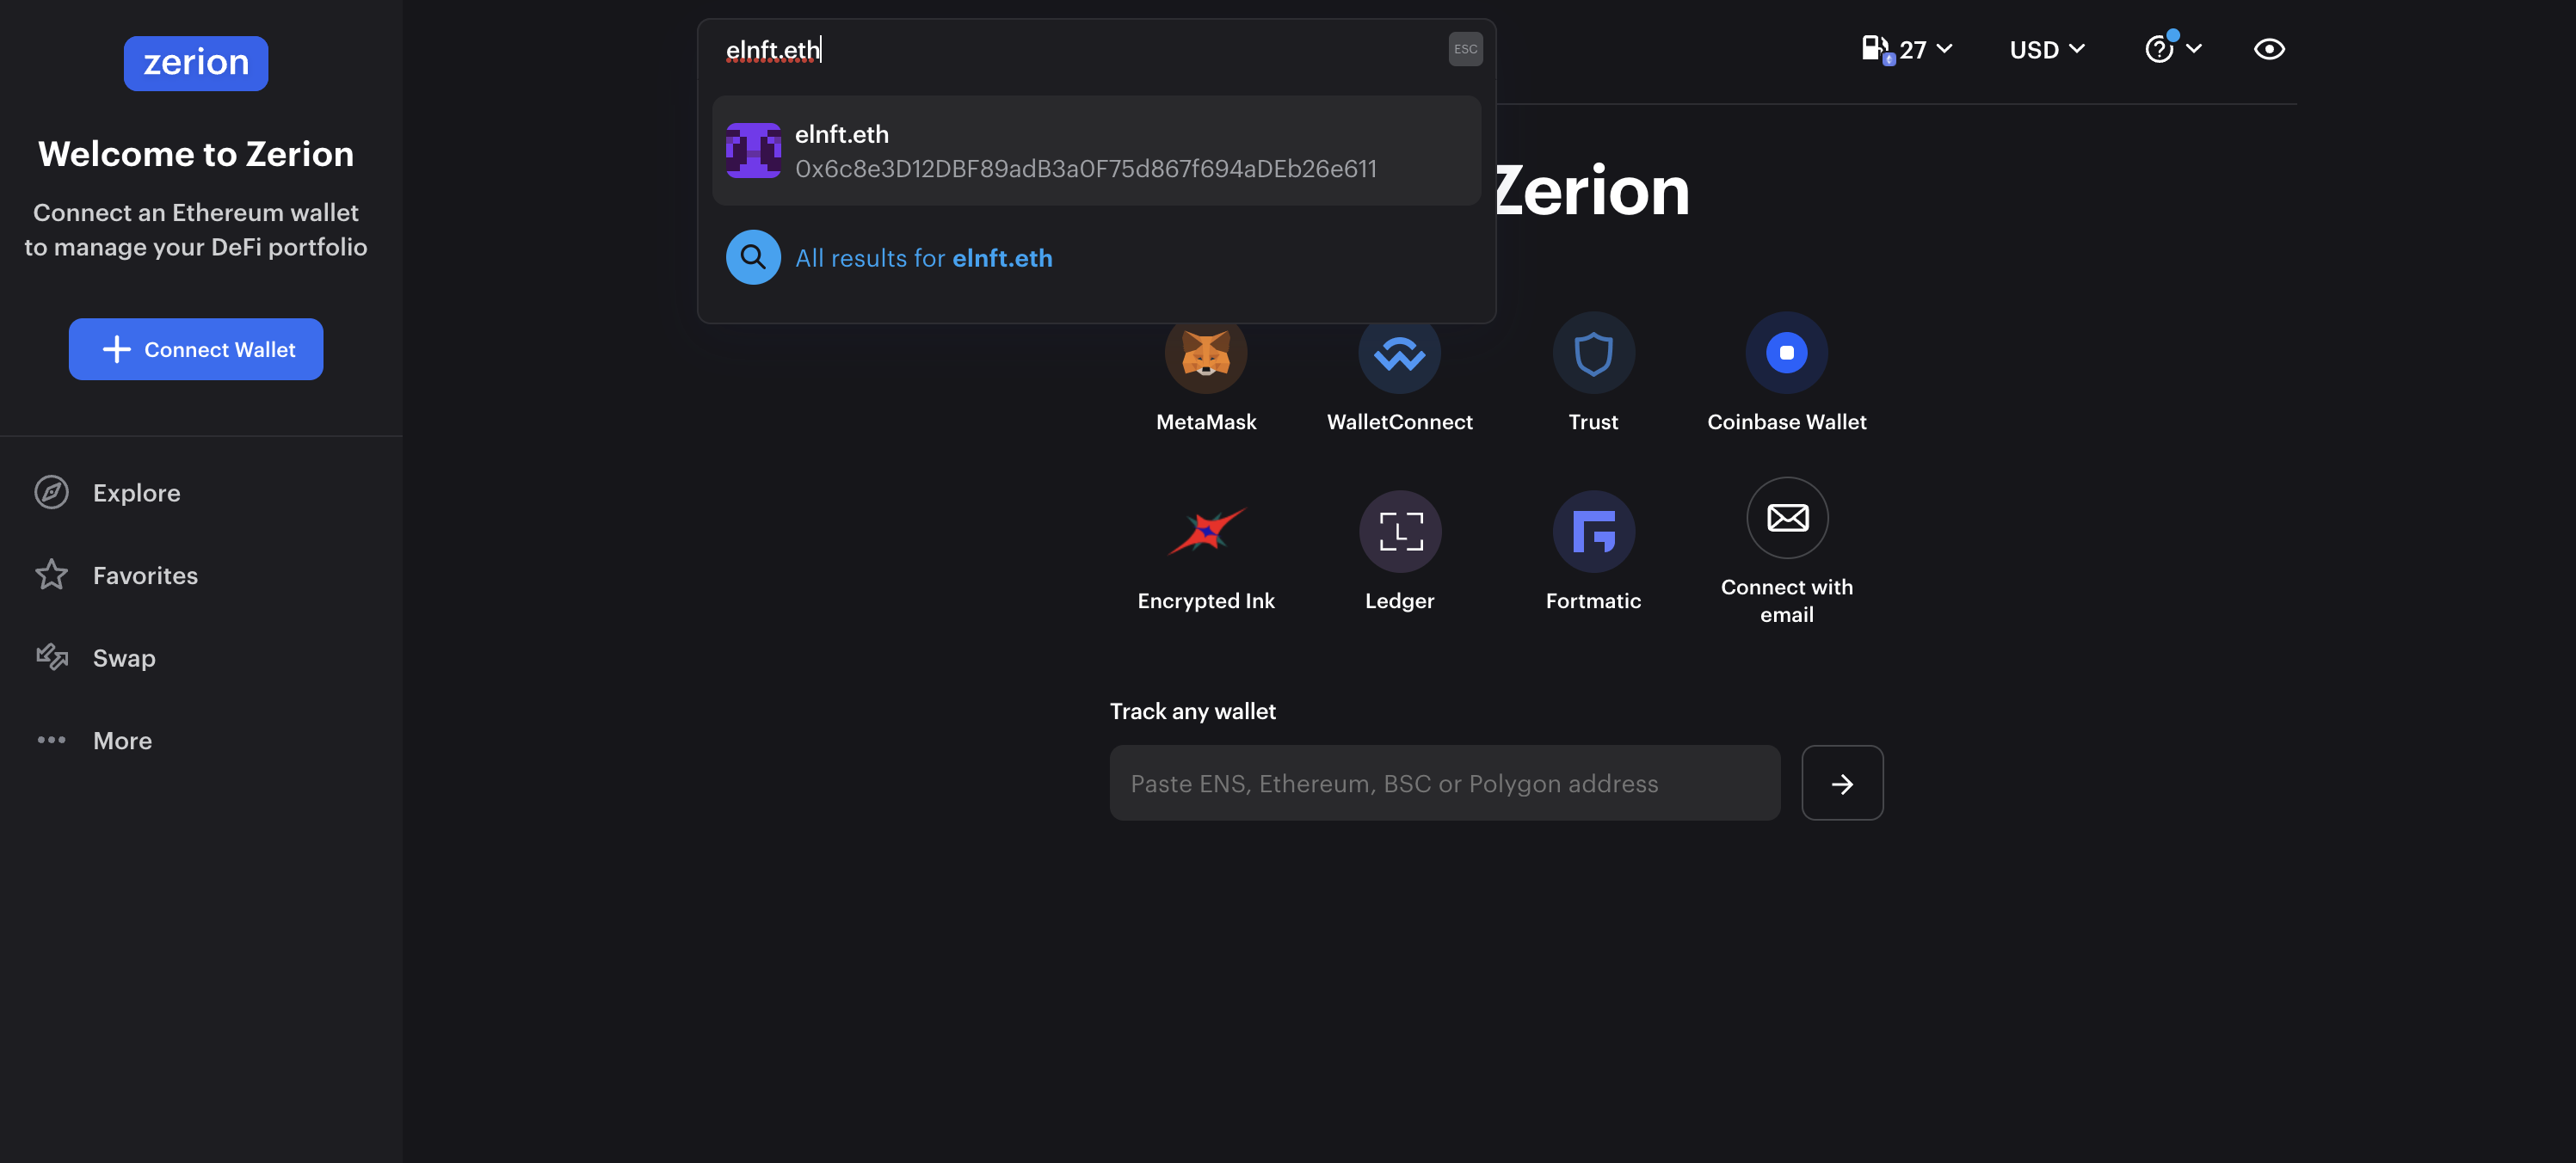 Search for a user on Zerion